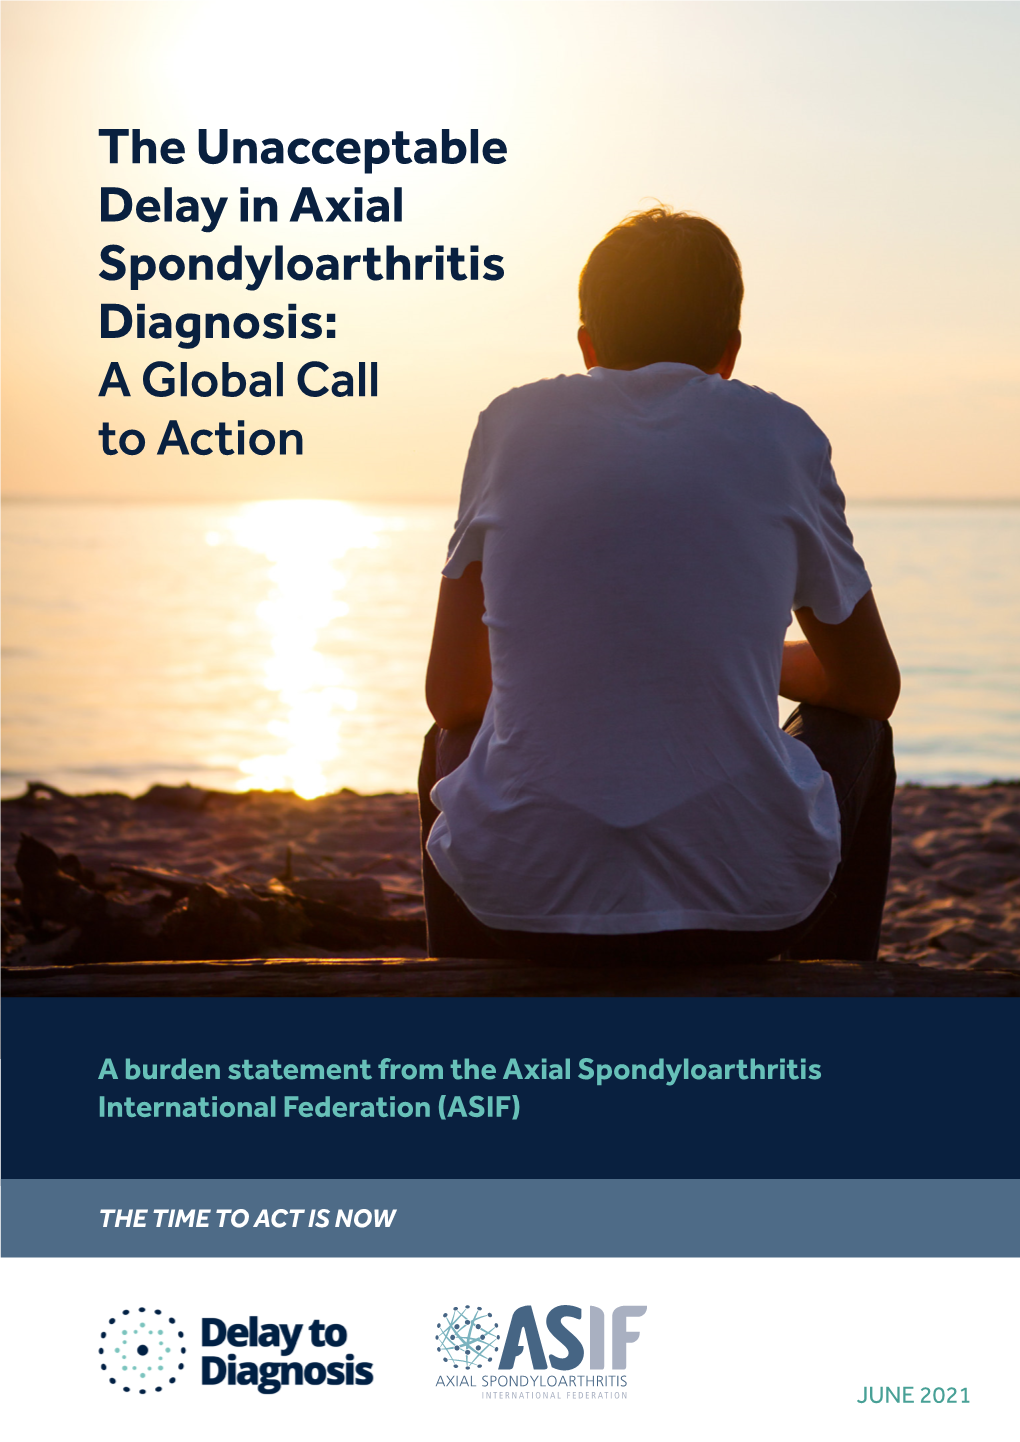 The Unacceptable Delay in Axial Spondyloarthritis Diagnosis: a Global Call to Action